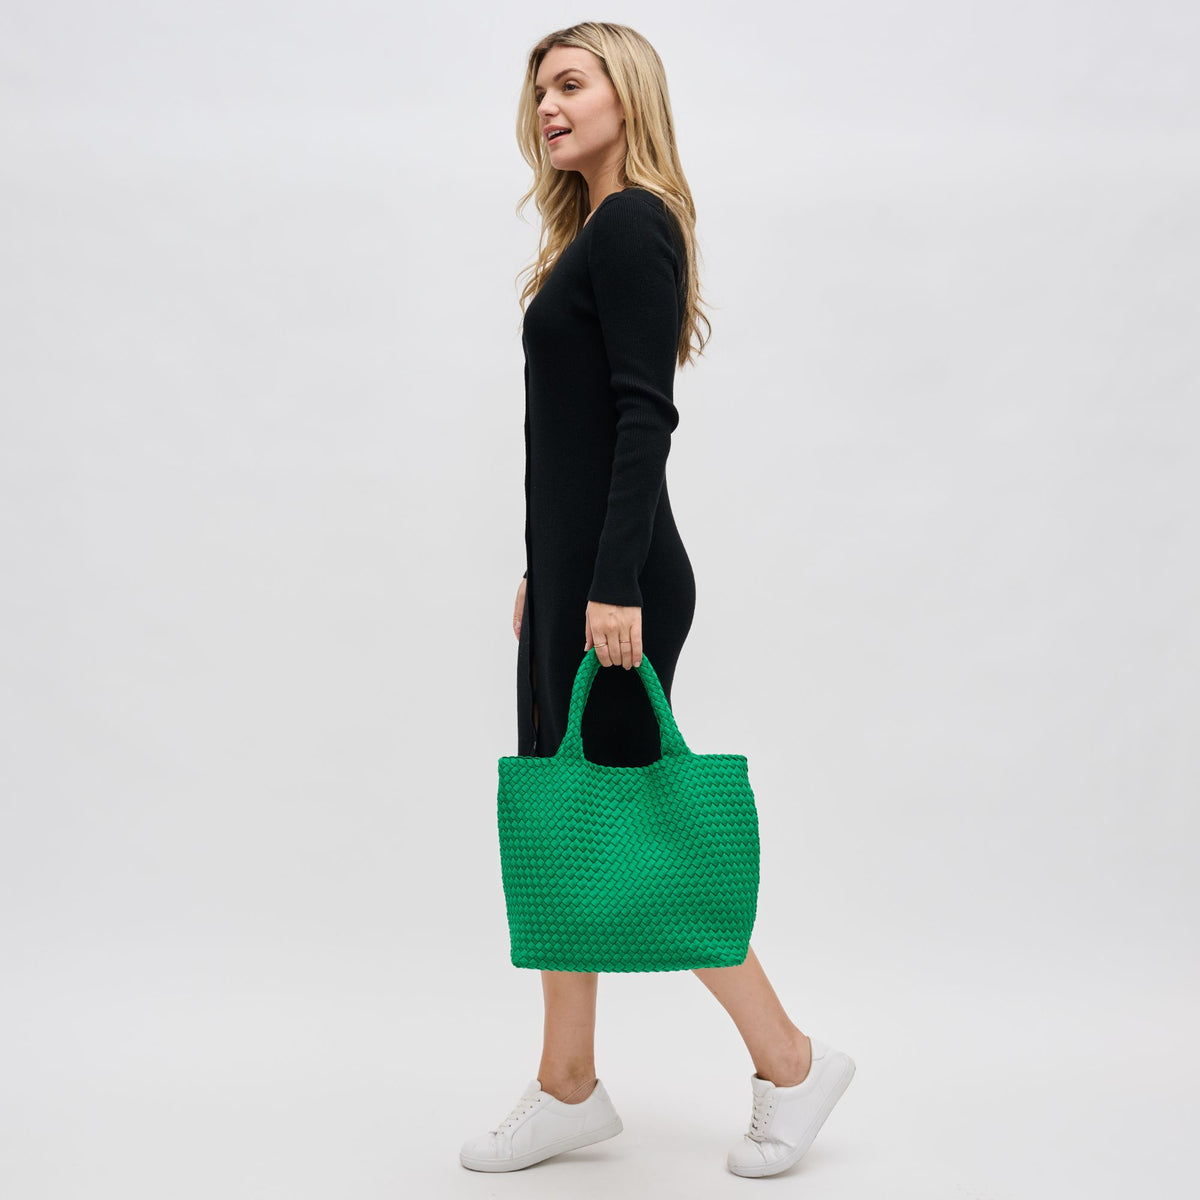 Woman wearing Kelly Green Sol and Selene Sky's The Limit - Medium Tote 841764108805 View 2 | Kelly Green